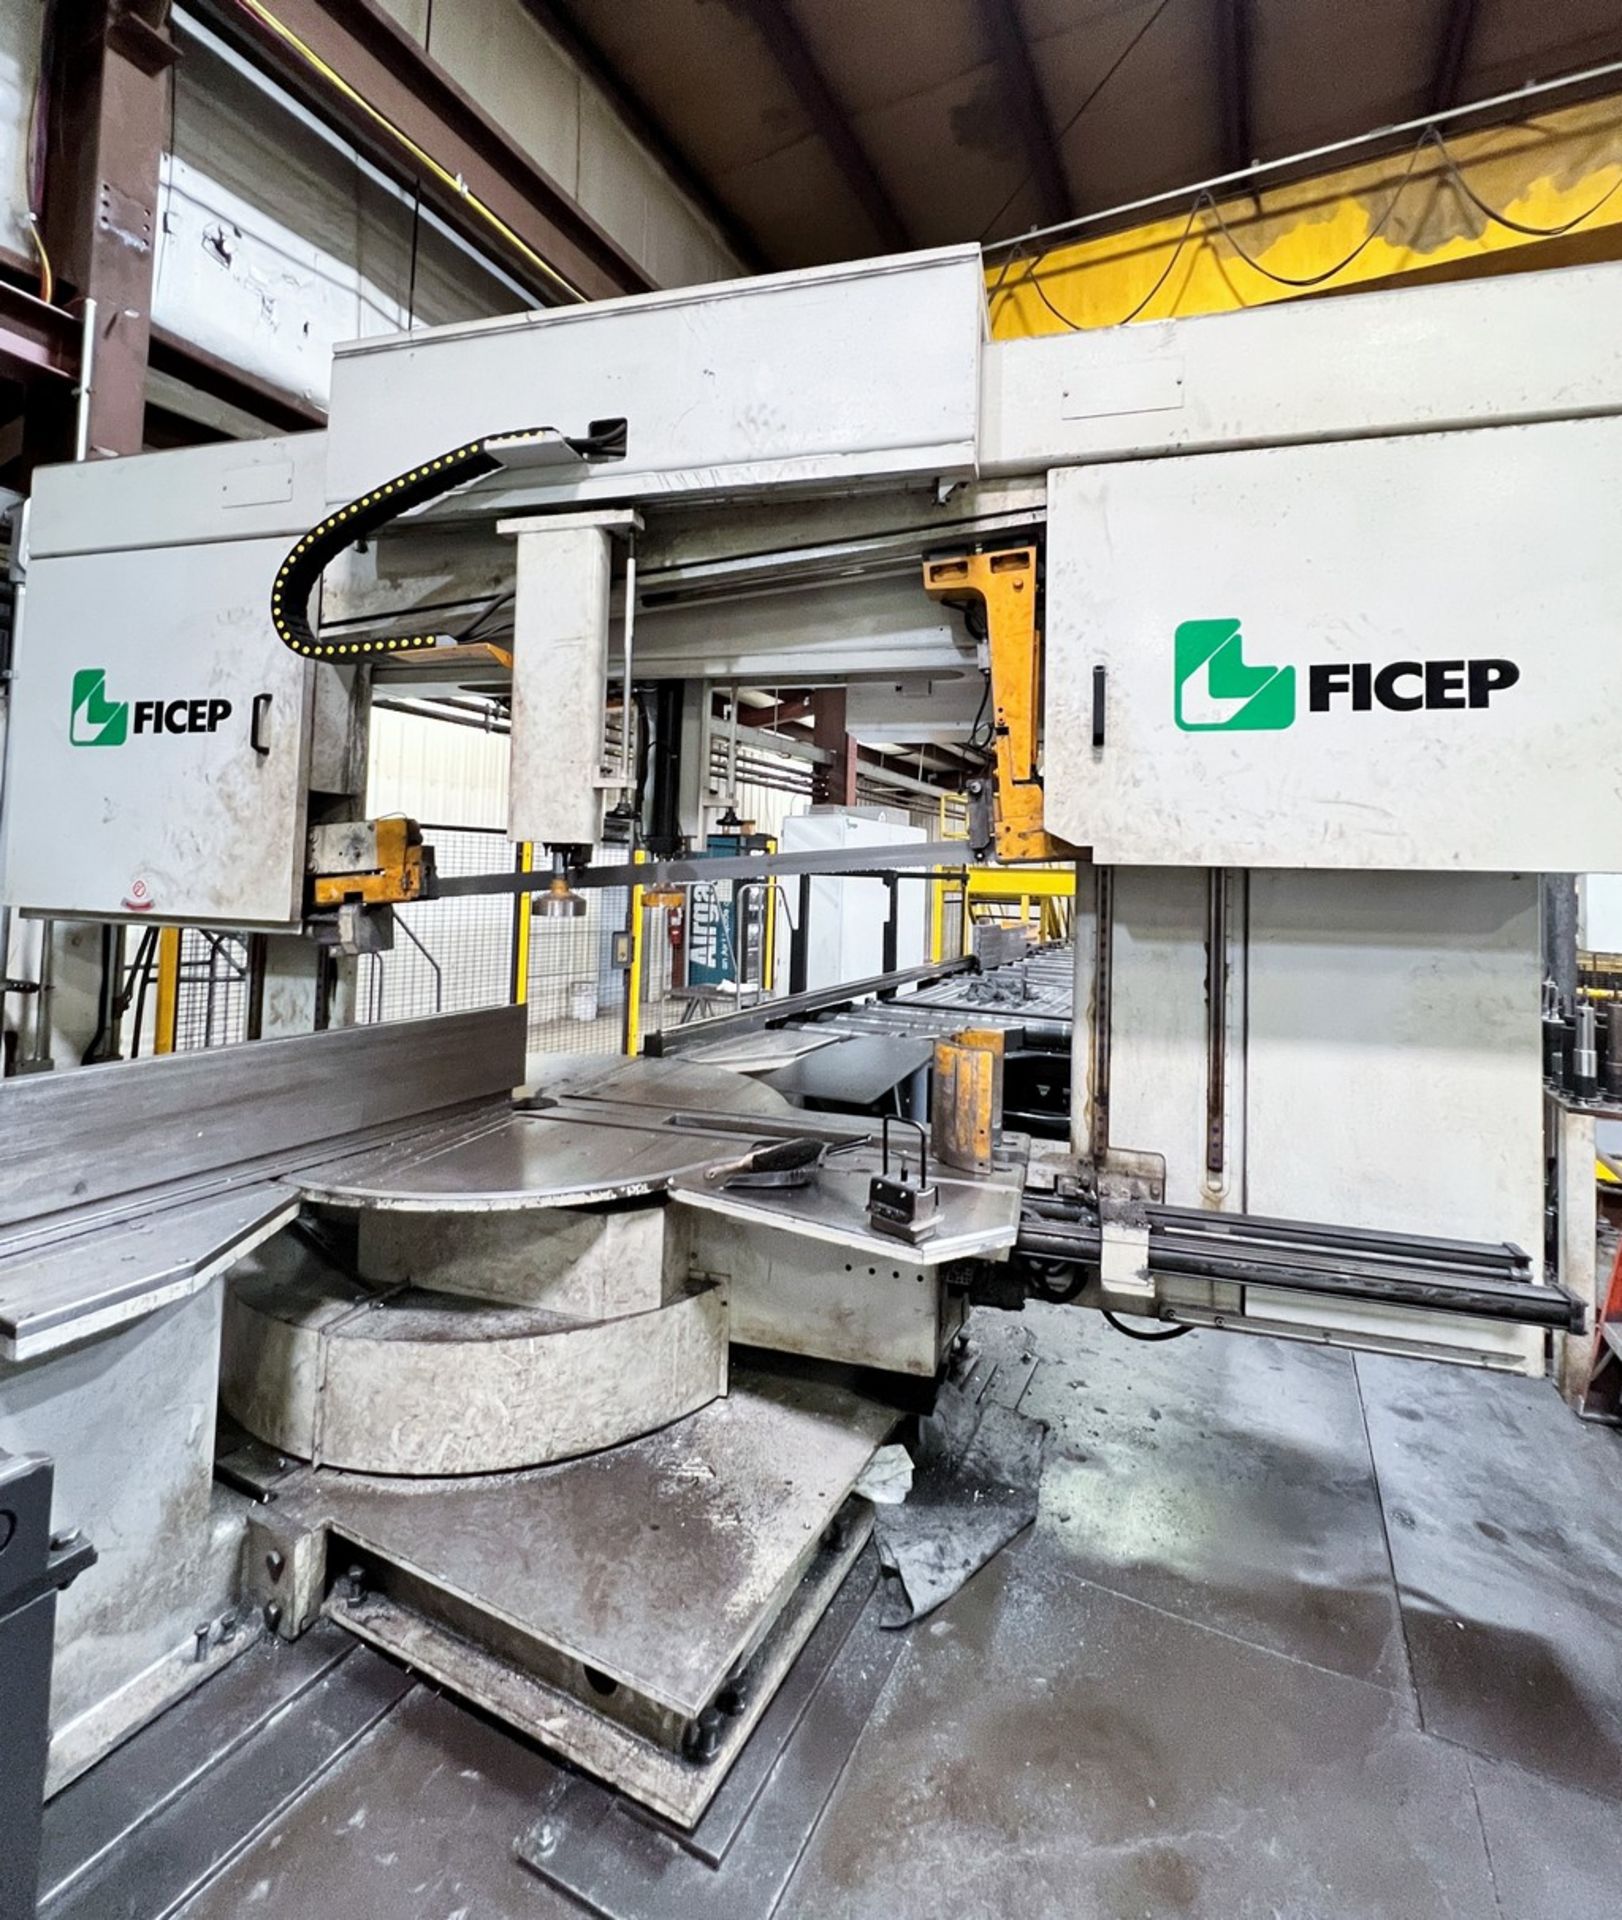 Ficep 1203 DDB CNC (3) Spindle Drilling & Saw Line, New 2014 - Image 13 of 22